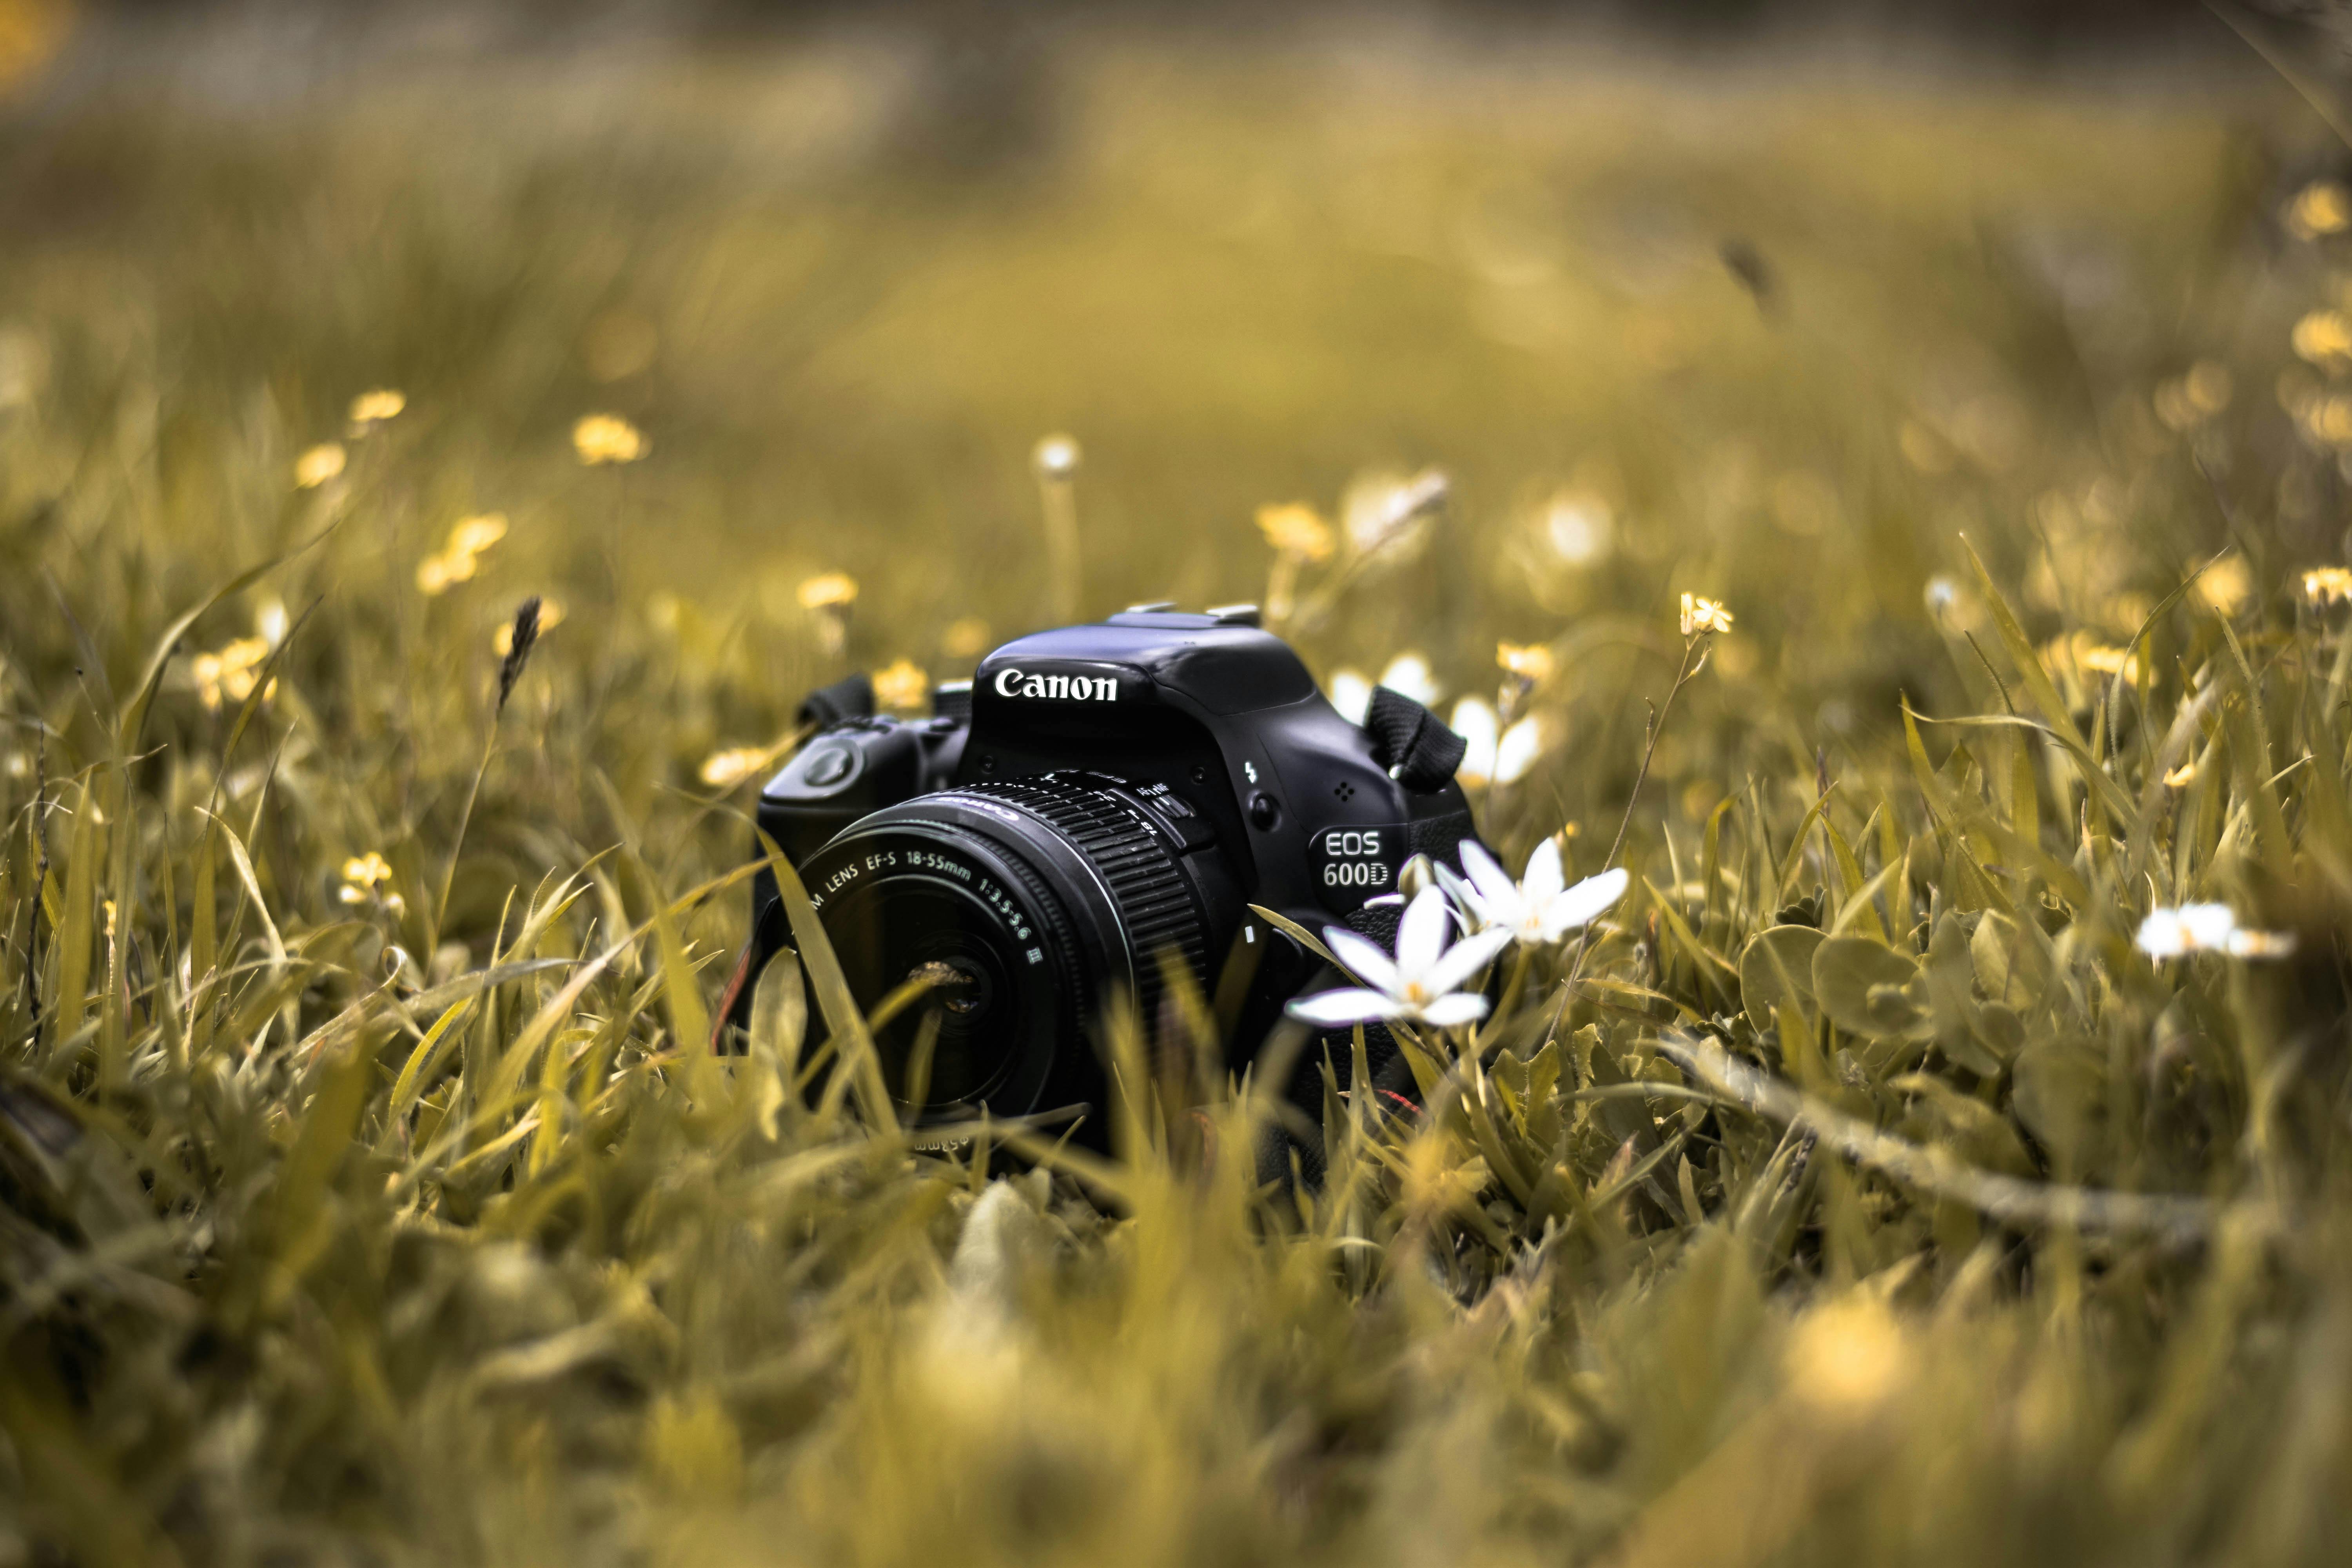 Black Sony Dslr Camera On Green Grass In Front Of Brown And Green